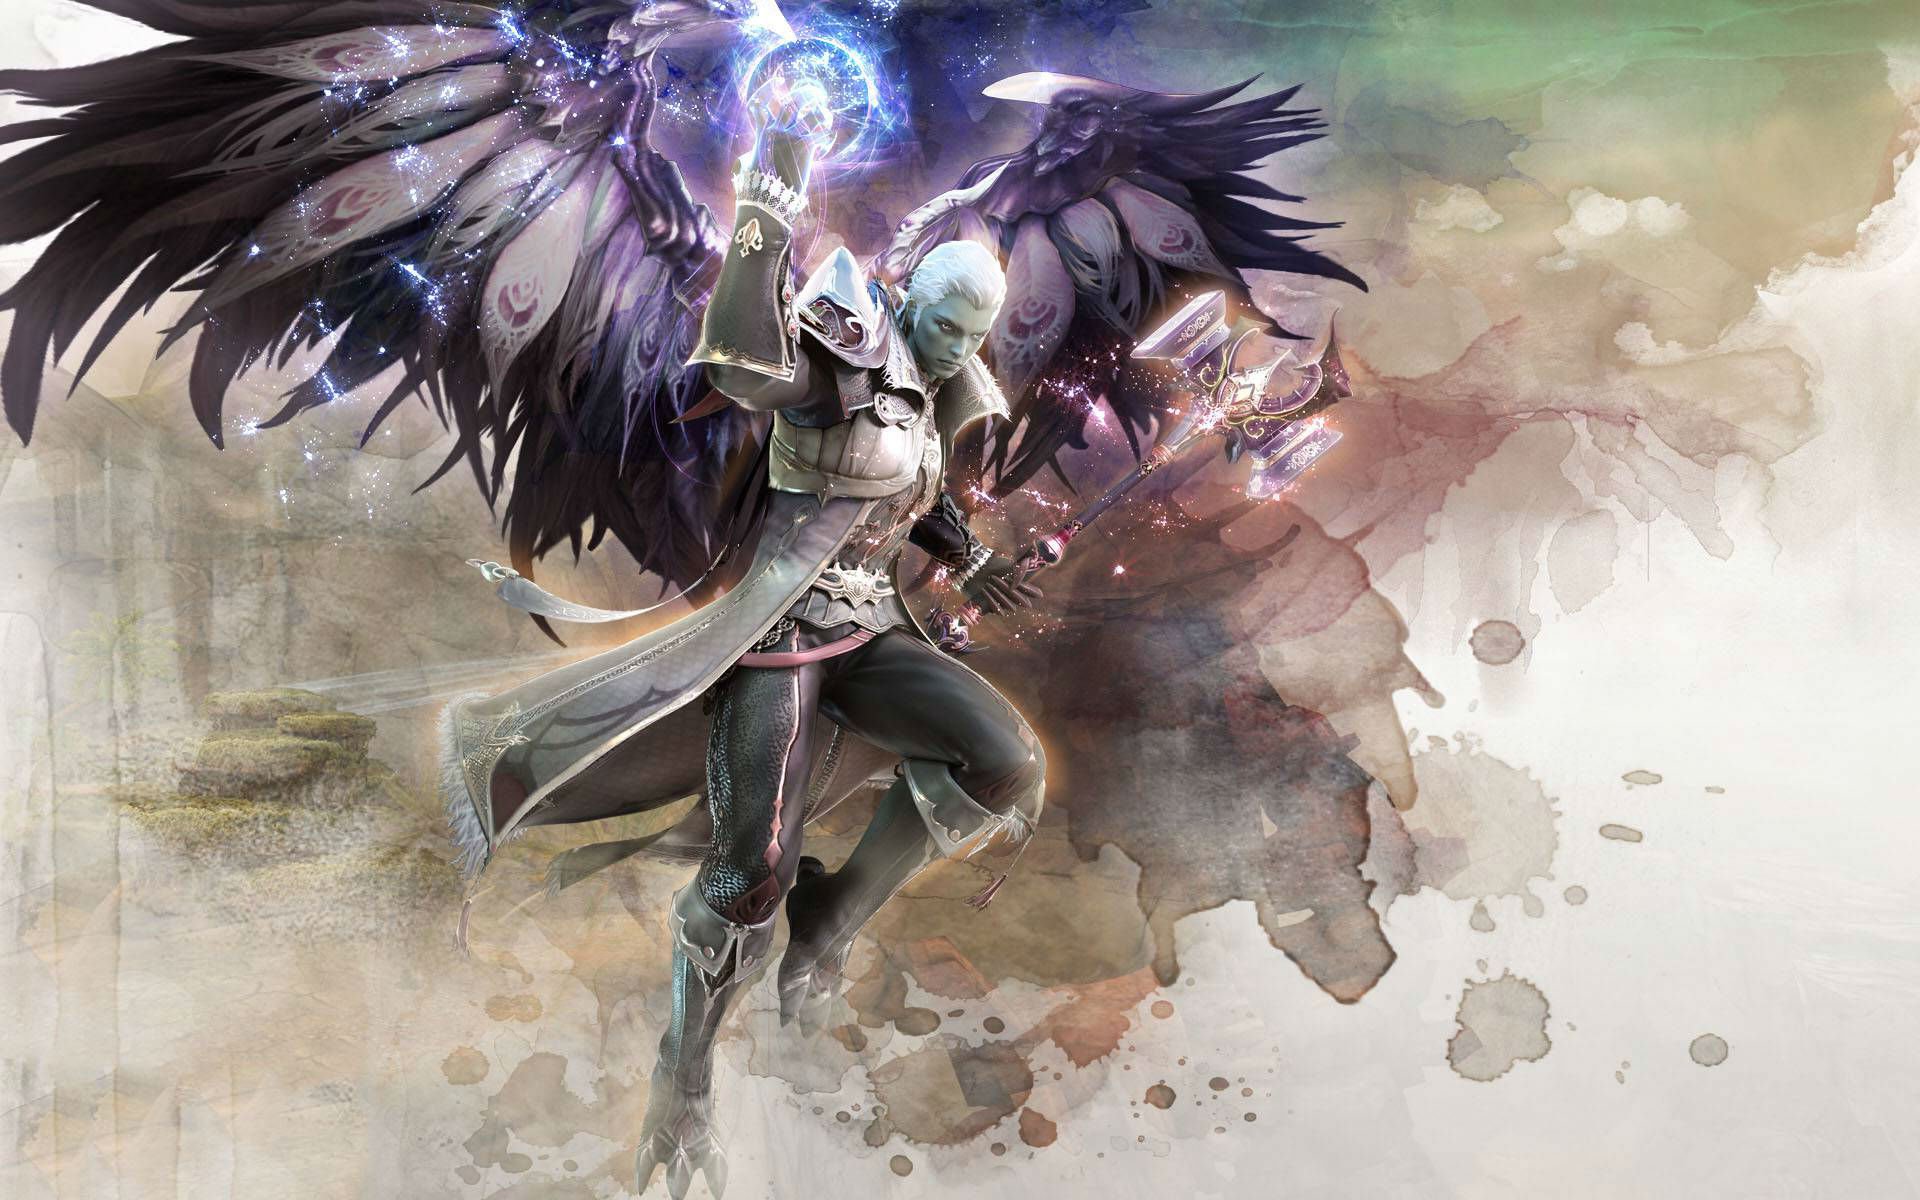 aion, Game, Video, Fantasy, Art, Artwork, Mmo, Online, Action, Fighting ...